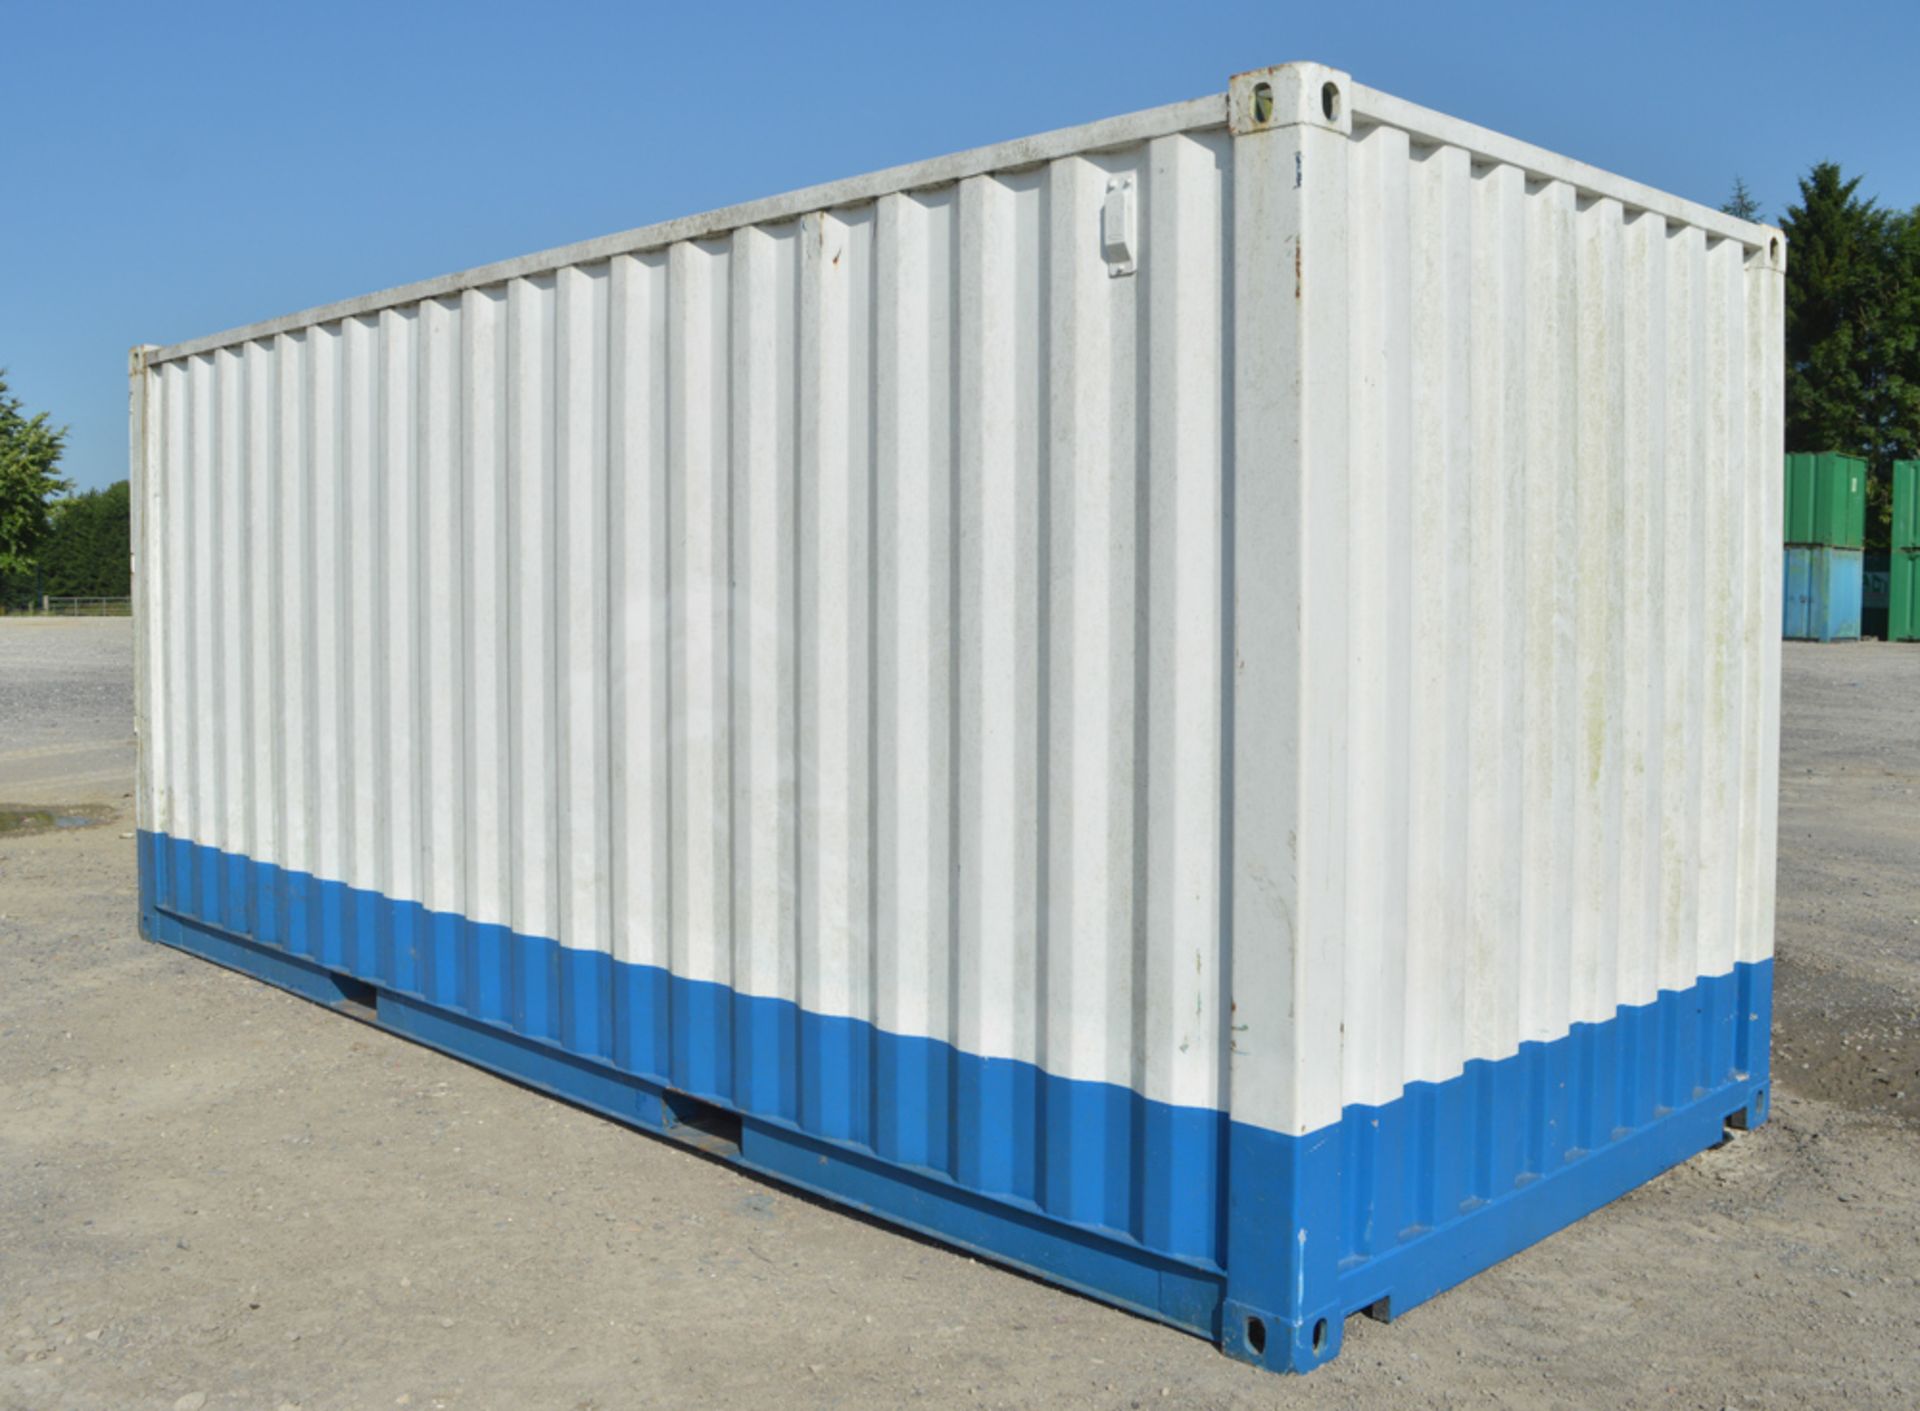 20 ft x 8 ft steel shipping container GTXU320710 - Image 2 of 5